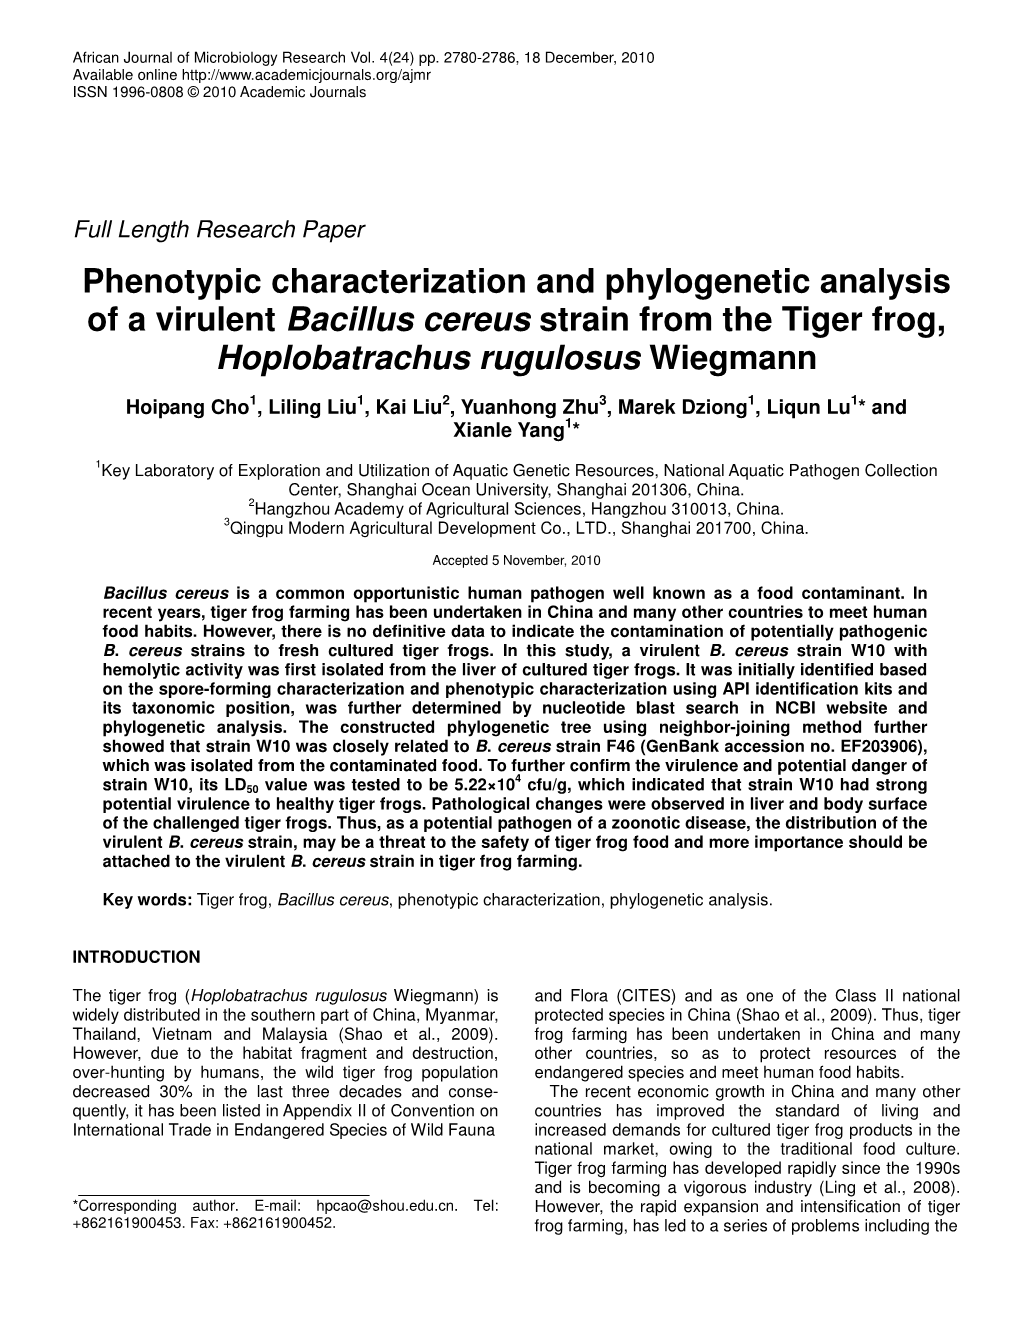 Phenotypic Characterization and Phylogenetic Analysis of a Virulent Bacillus Cereus Strain from the Tiger Frog, Hoplobatrachus Rugulosus Wiegmann